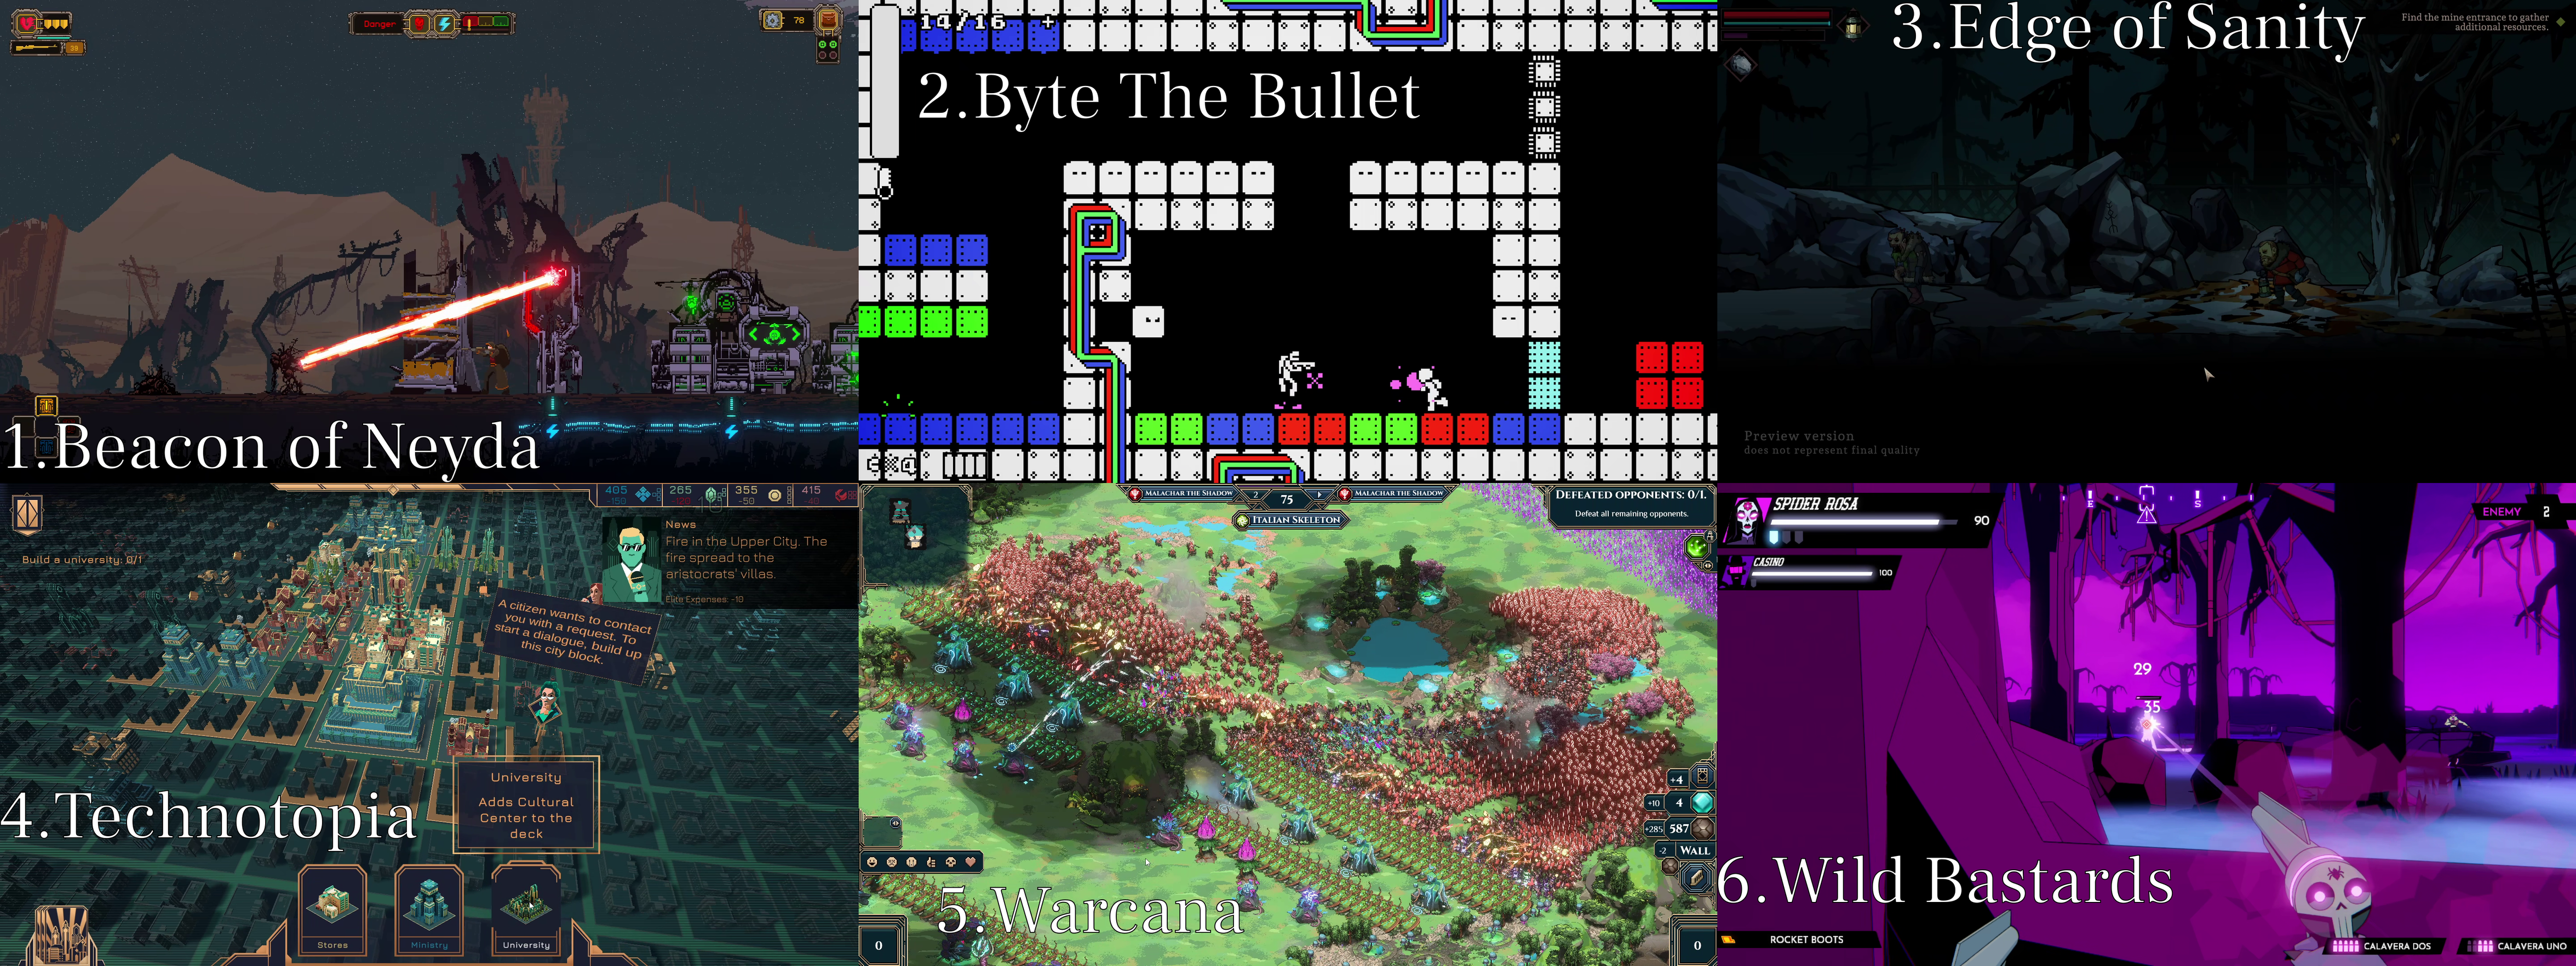 Screenshots of the games Beacon of Neyda, Byte the Bullet, Edge of Sanity, Technotopia, Warcana, and Wild Bastards